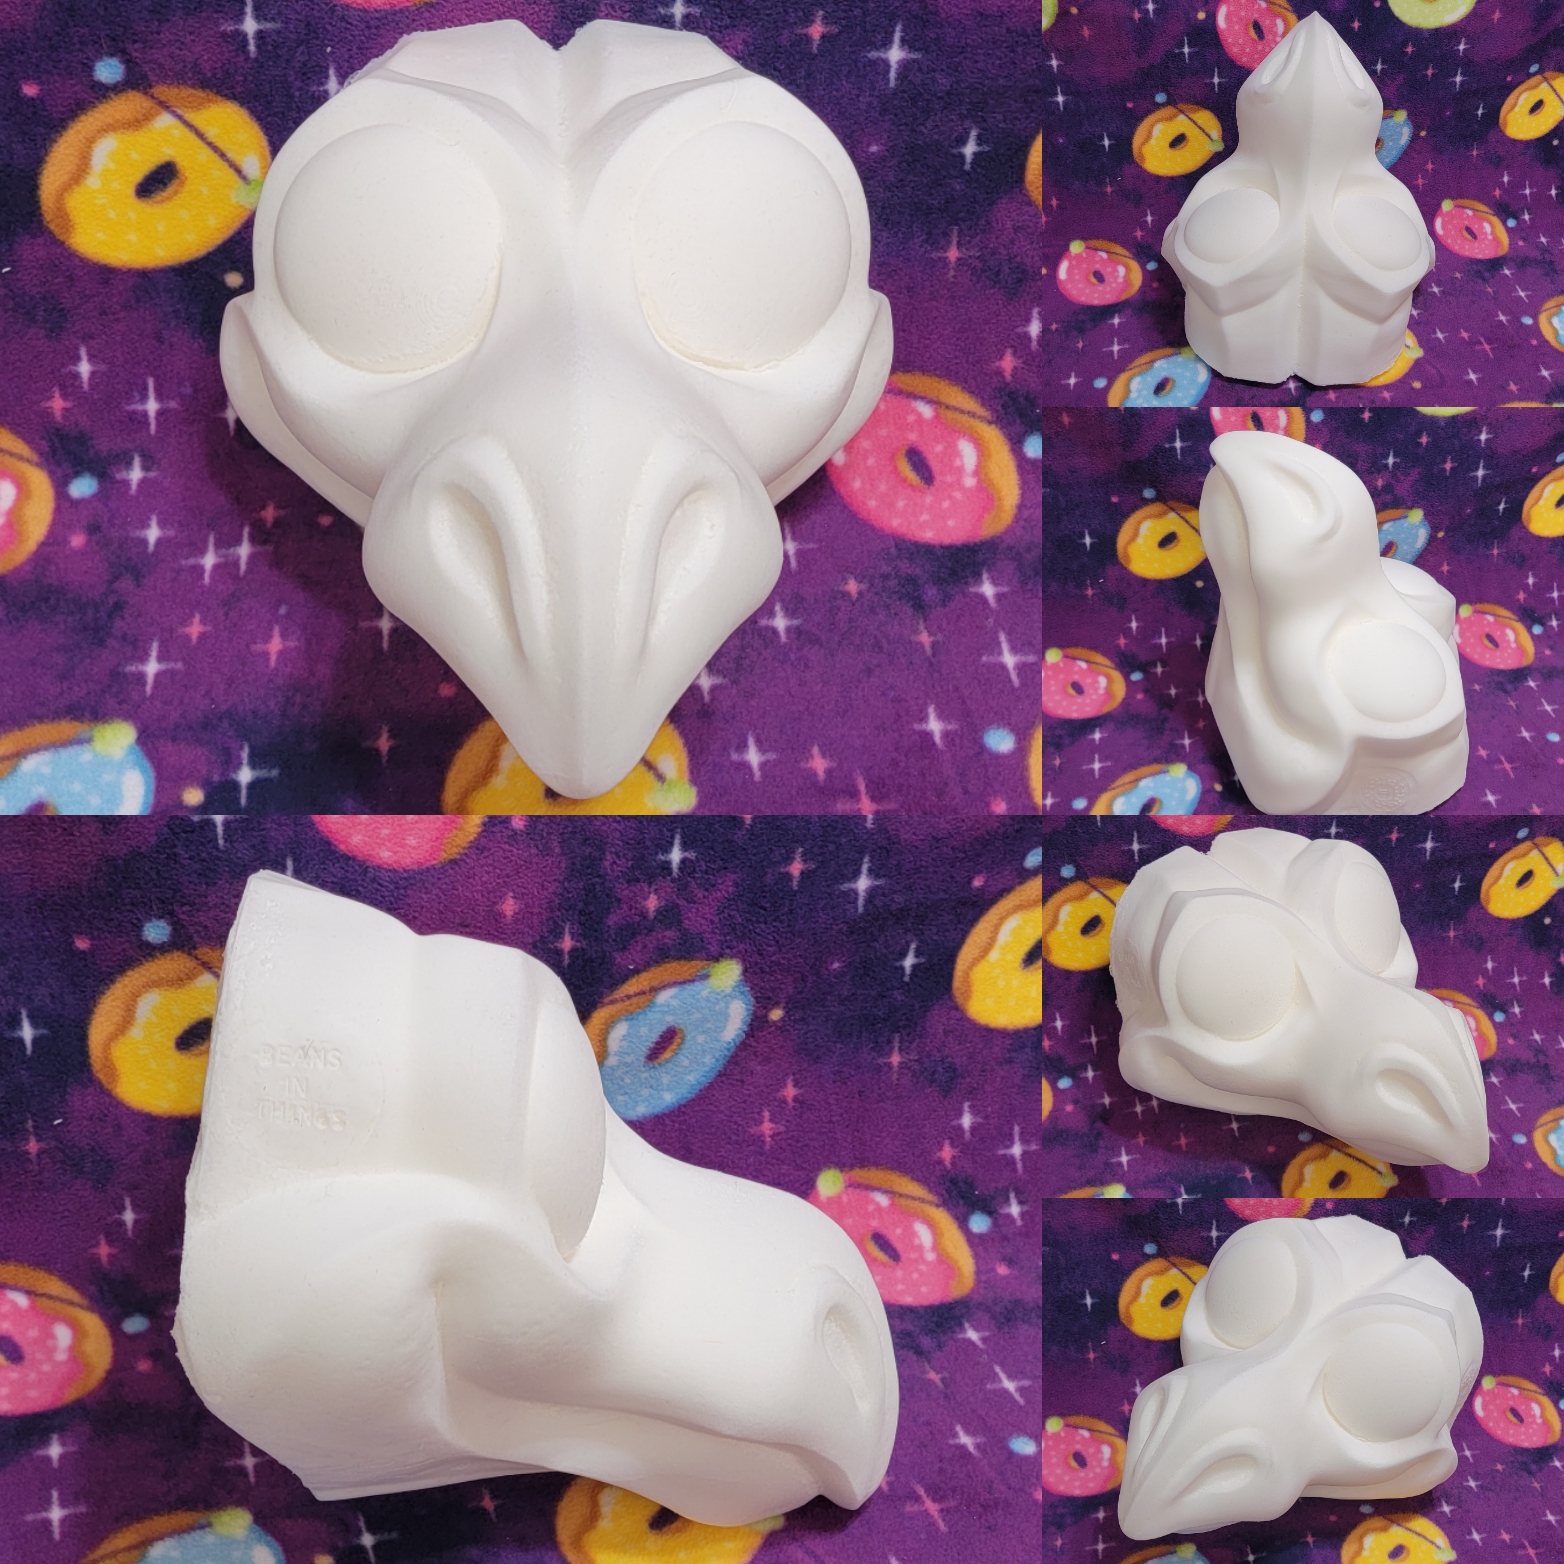 A kit for creating your own dutch angel dragon is shown. To the right is a dragon base made from soft foam, surrounded by foam sheets, resin eye frames, a pink fabric tongue, a pouch with a folded balaclava and two strips of elastic.